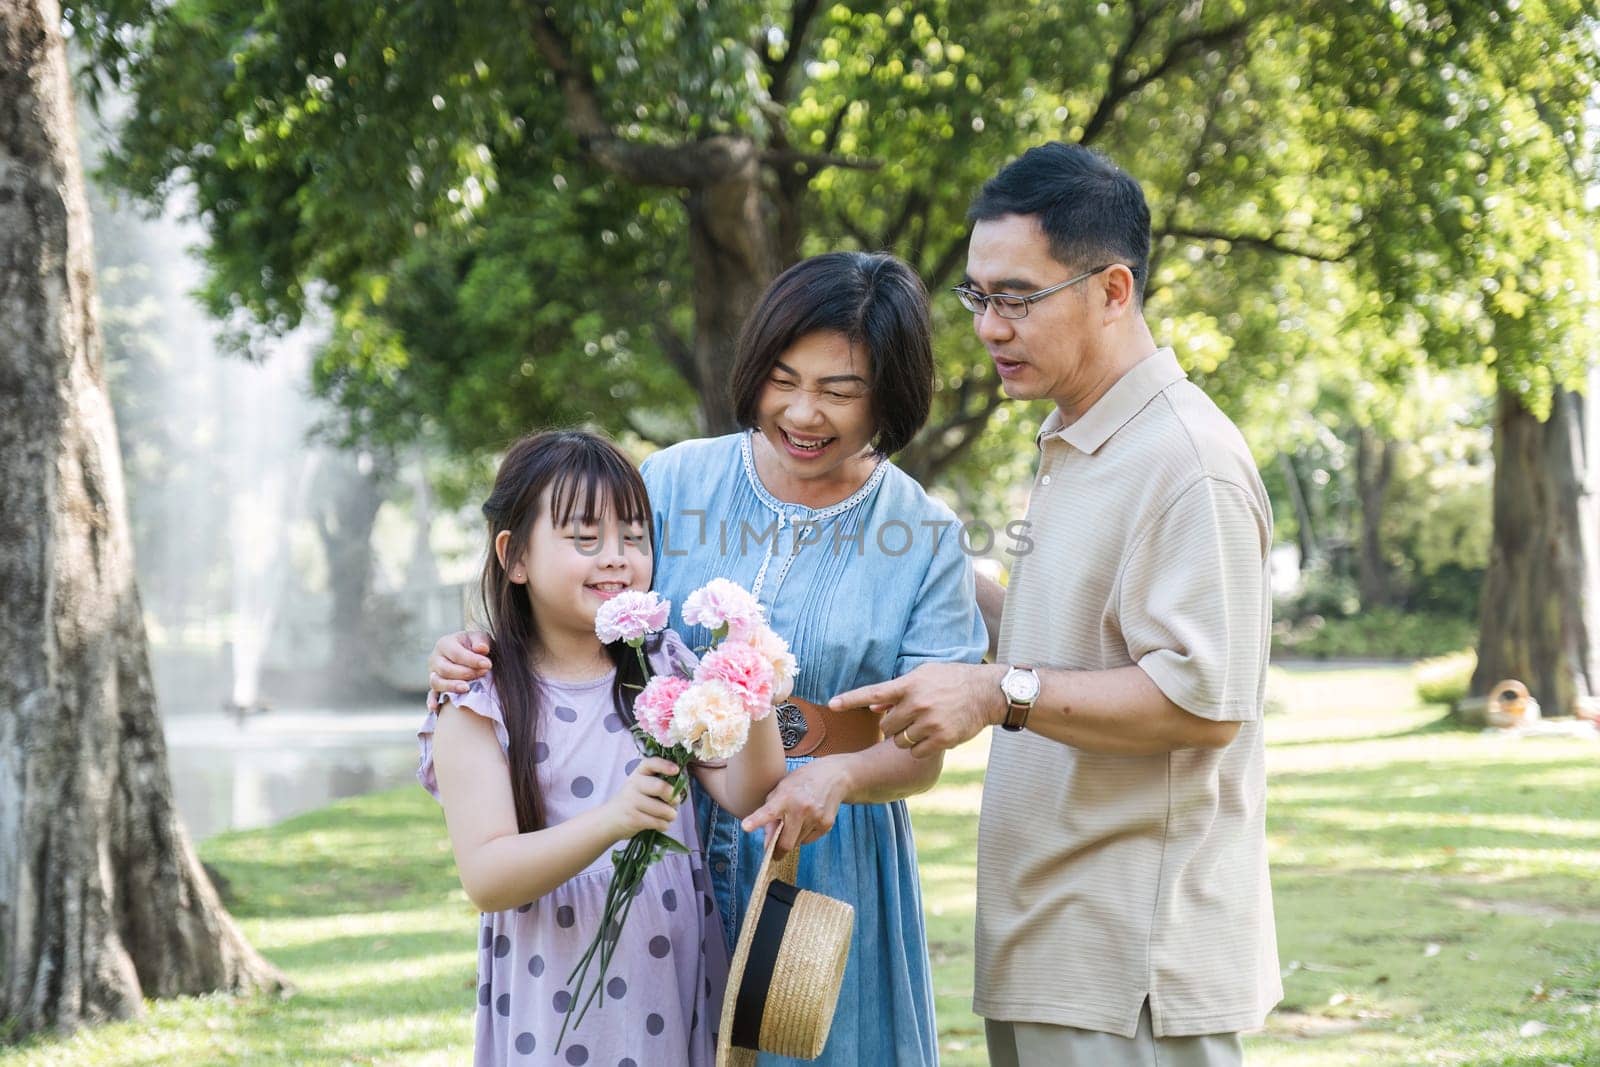 Kind-hearted Asian senior grandparent Warm and happy enjoying a stroll through the park with their adorable little granddaughter. On a clear day together lovely family by wichayada